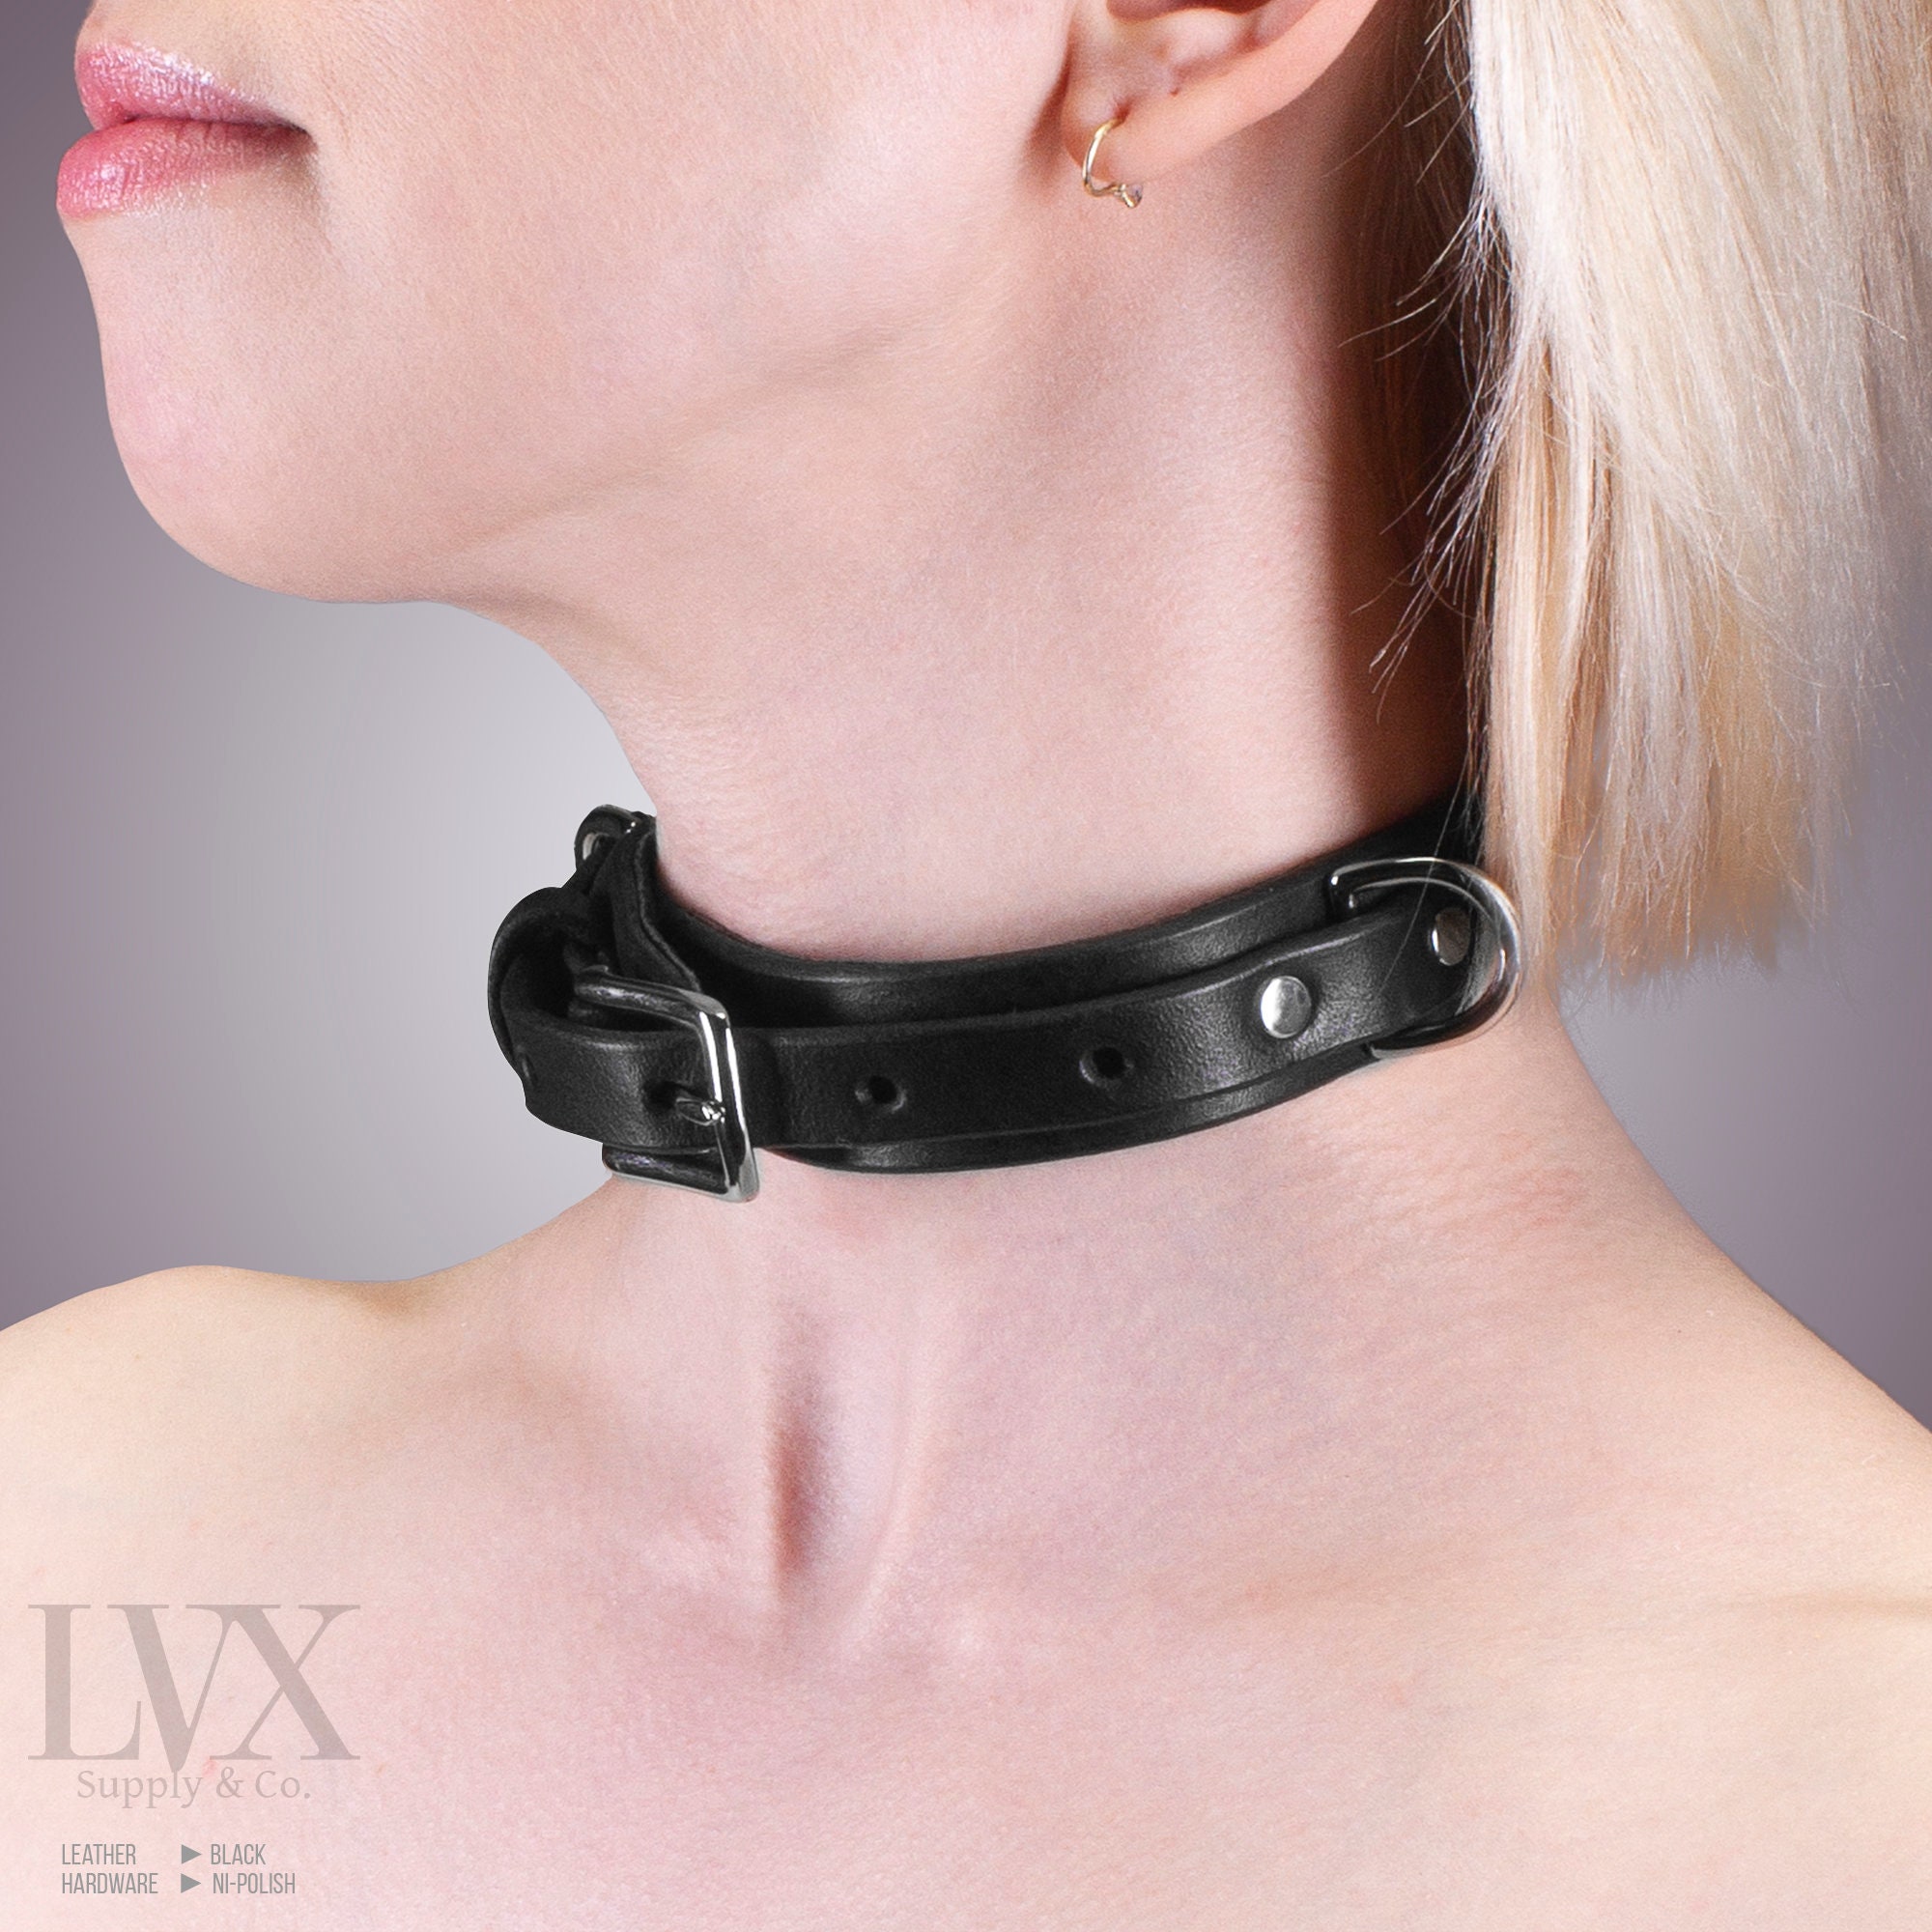 Low Profile BDSM Collar | Suede Lined Leather Bondage Collar for DDLG Submissive Femdom Slave Pet Play Fetish Wear BDsM-Gear | LVX Supply photo